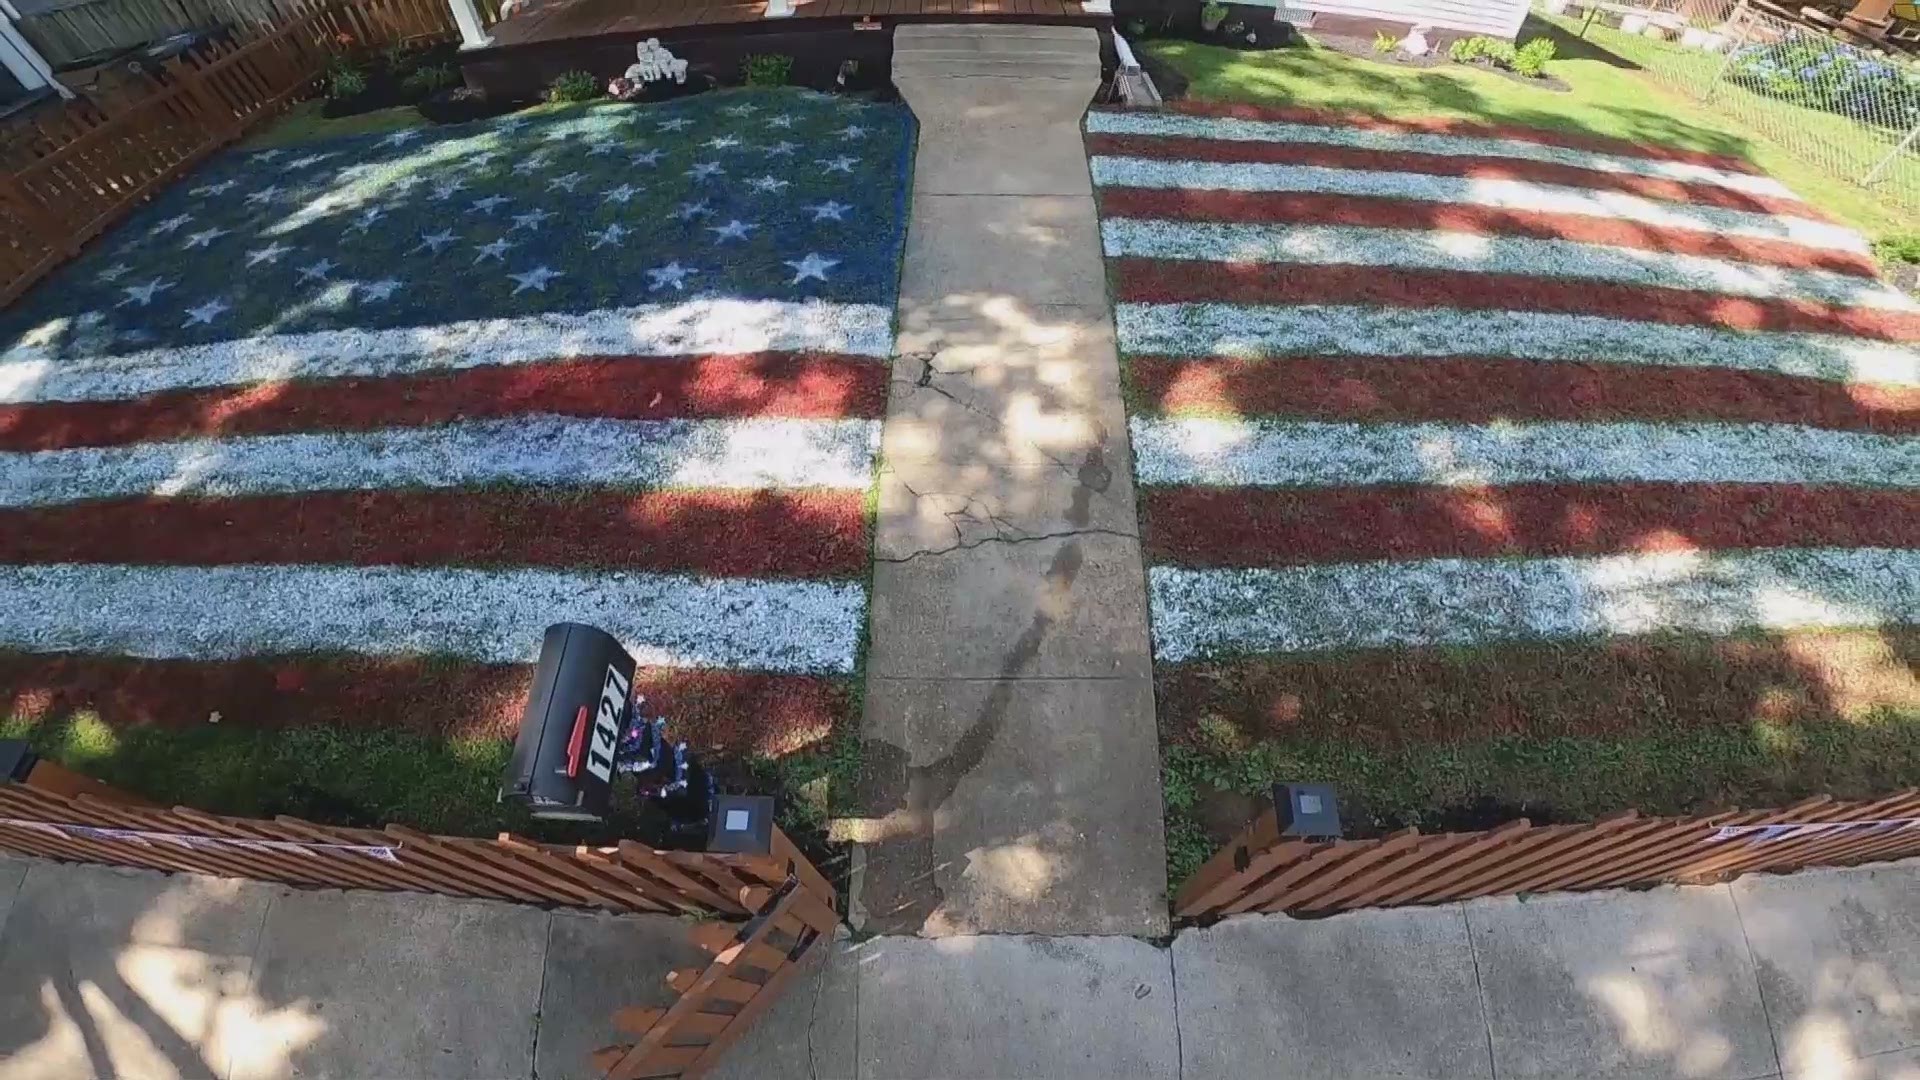 The family painted their lawn the American flag on Tuesday, ahead of Independence Day.